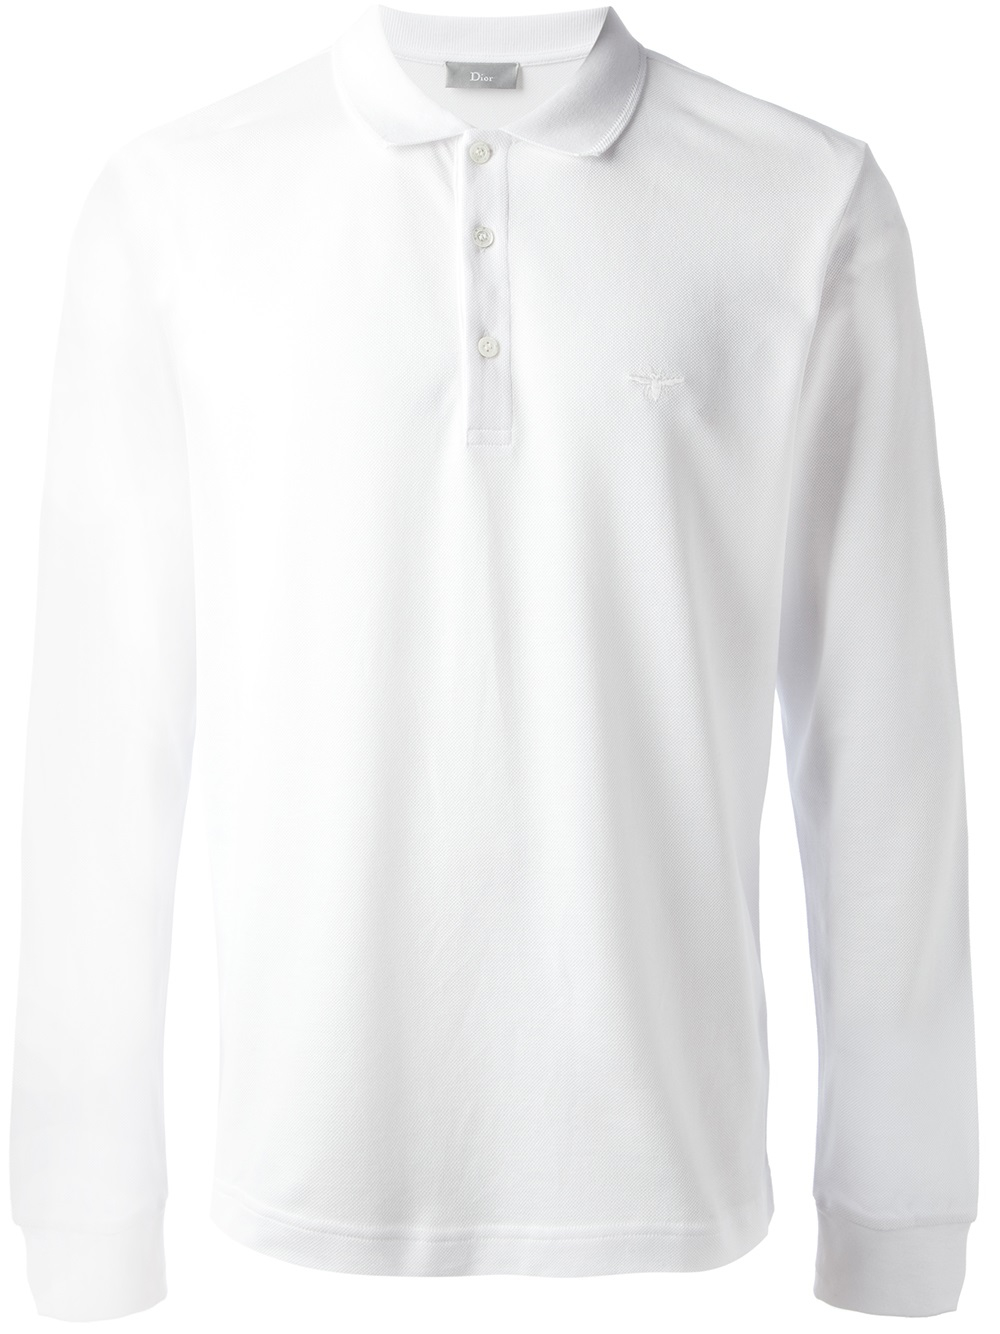 Dior Homme Long Sleeve Polo Shirt in 